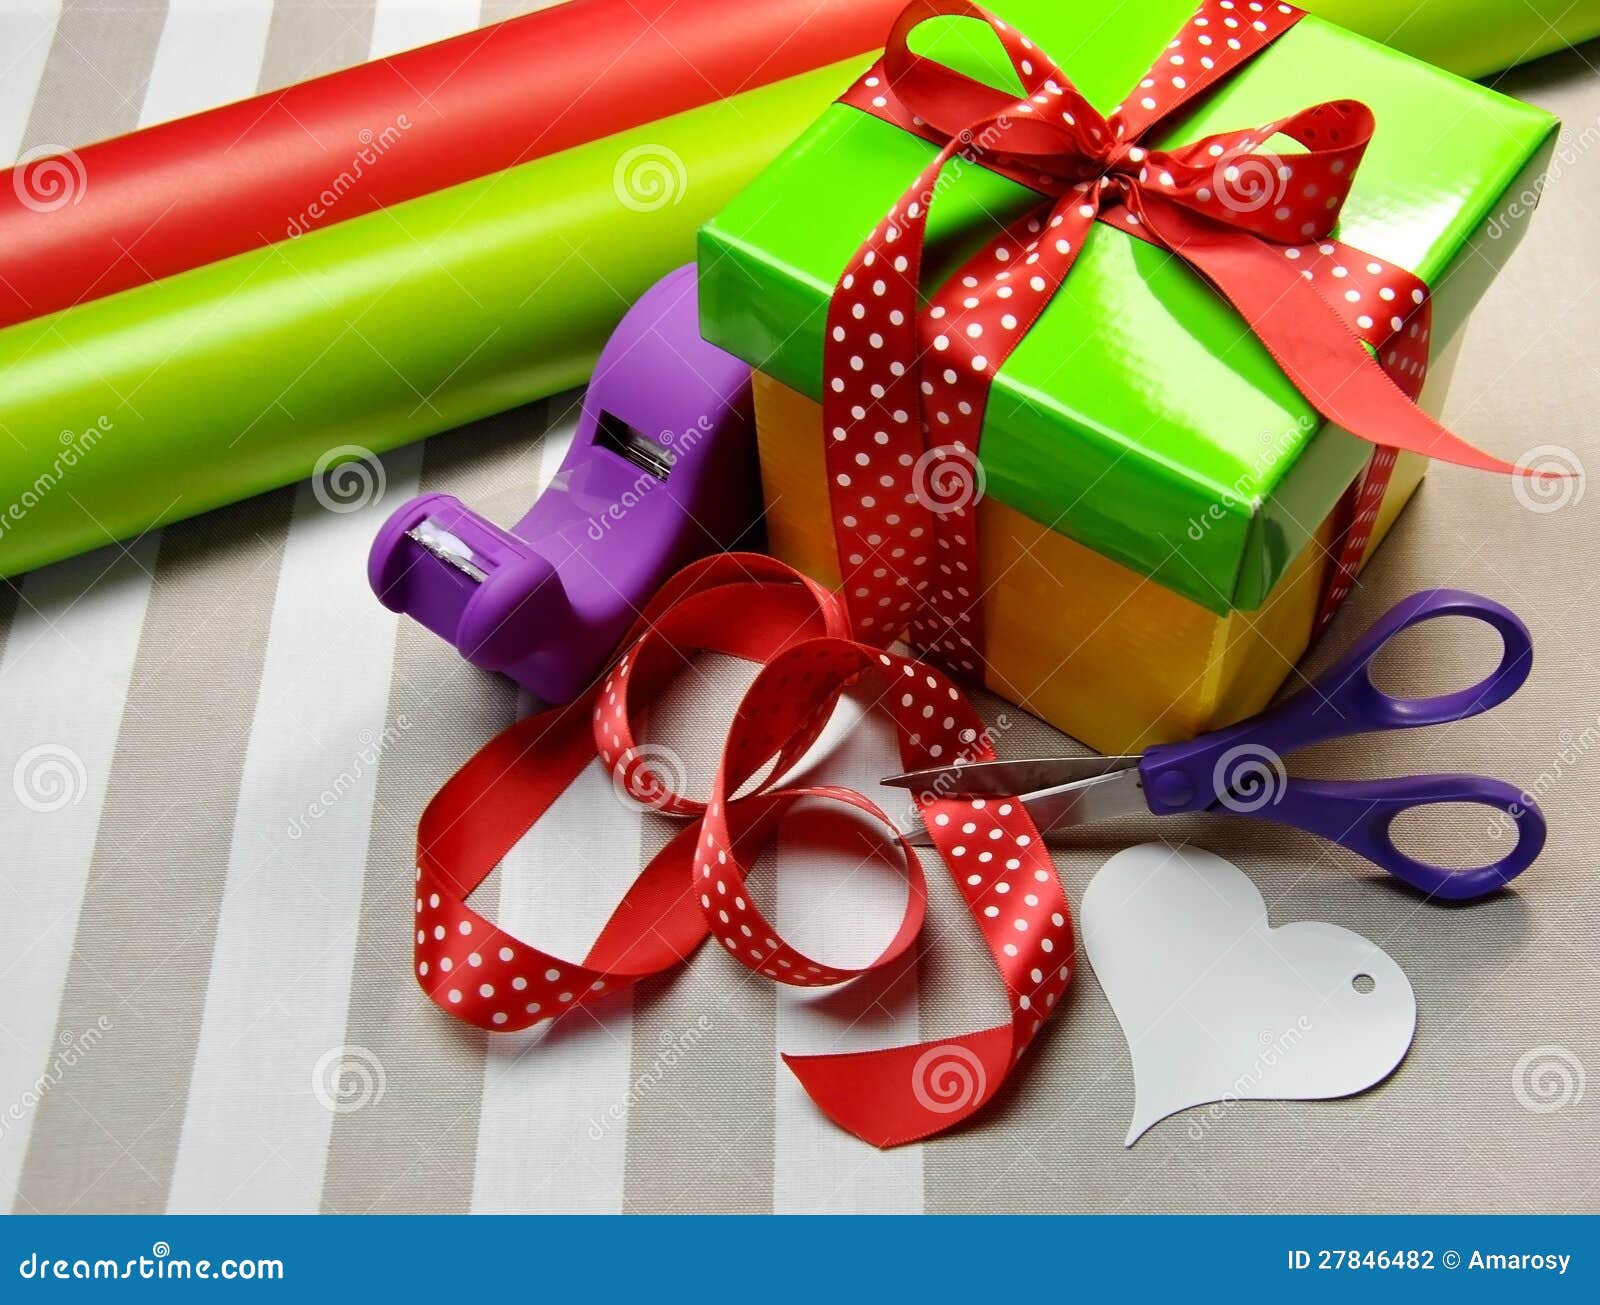 Roll Wrapping Paper Scissors Tags Ribbons Stock Photo 2301598667